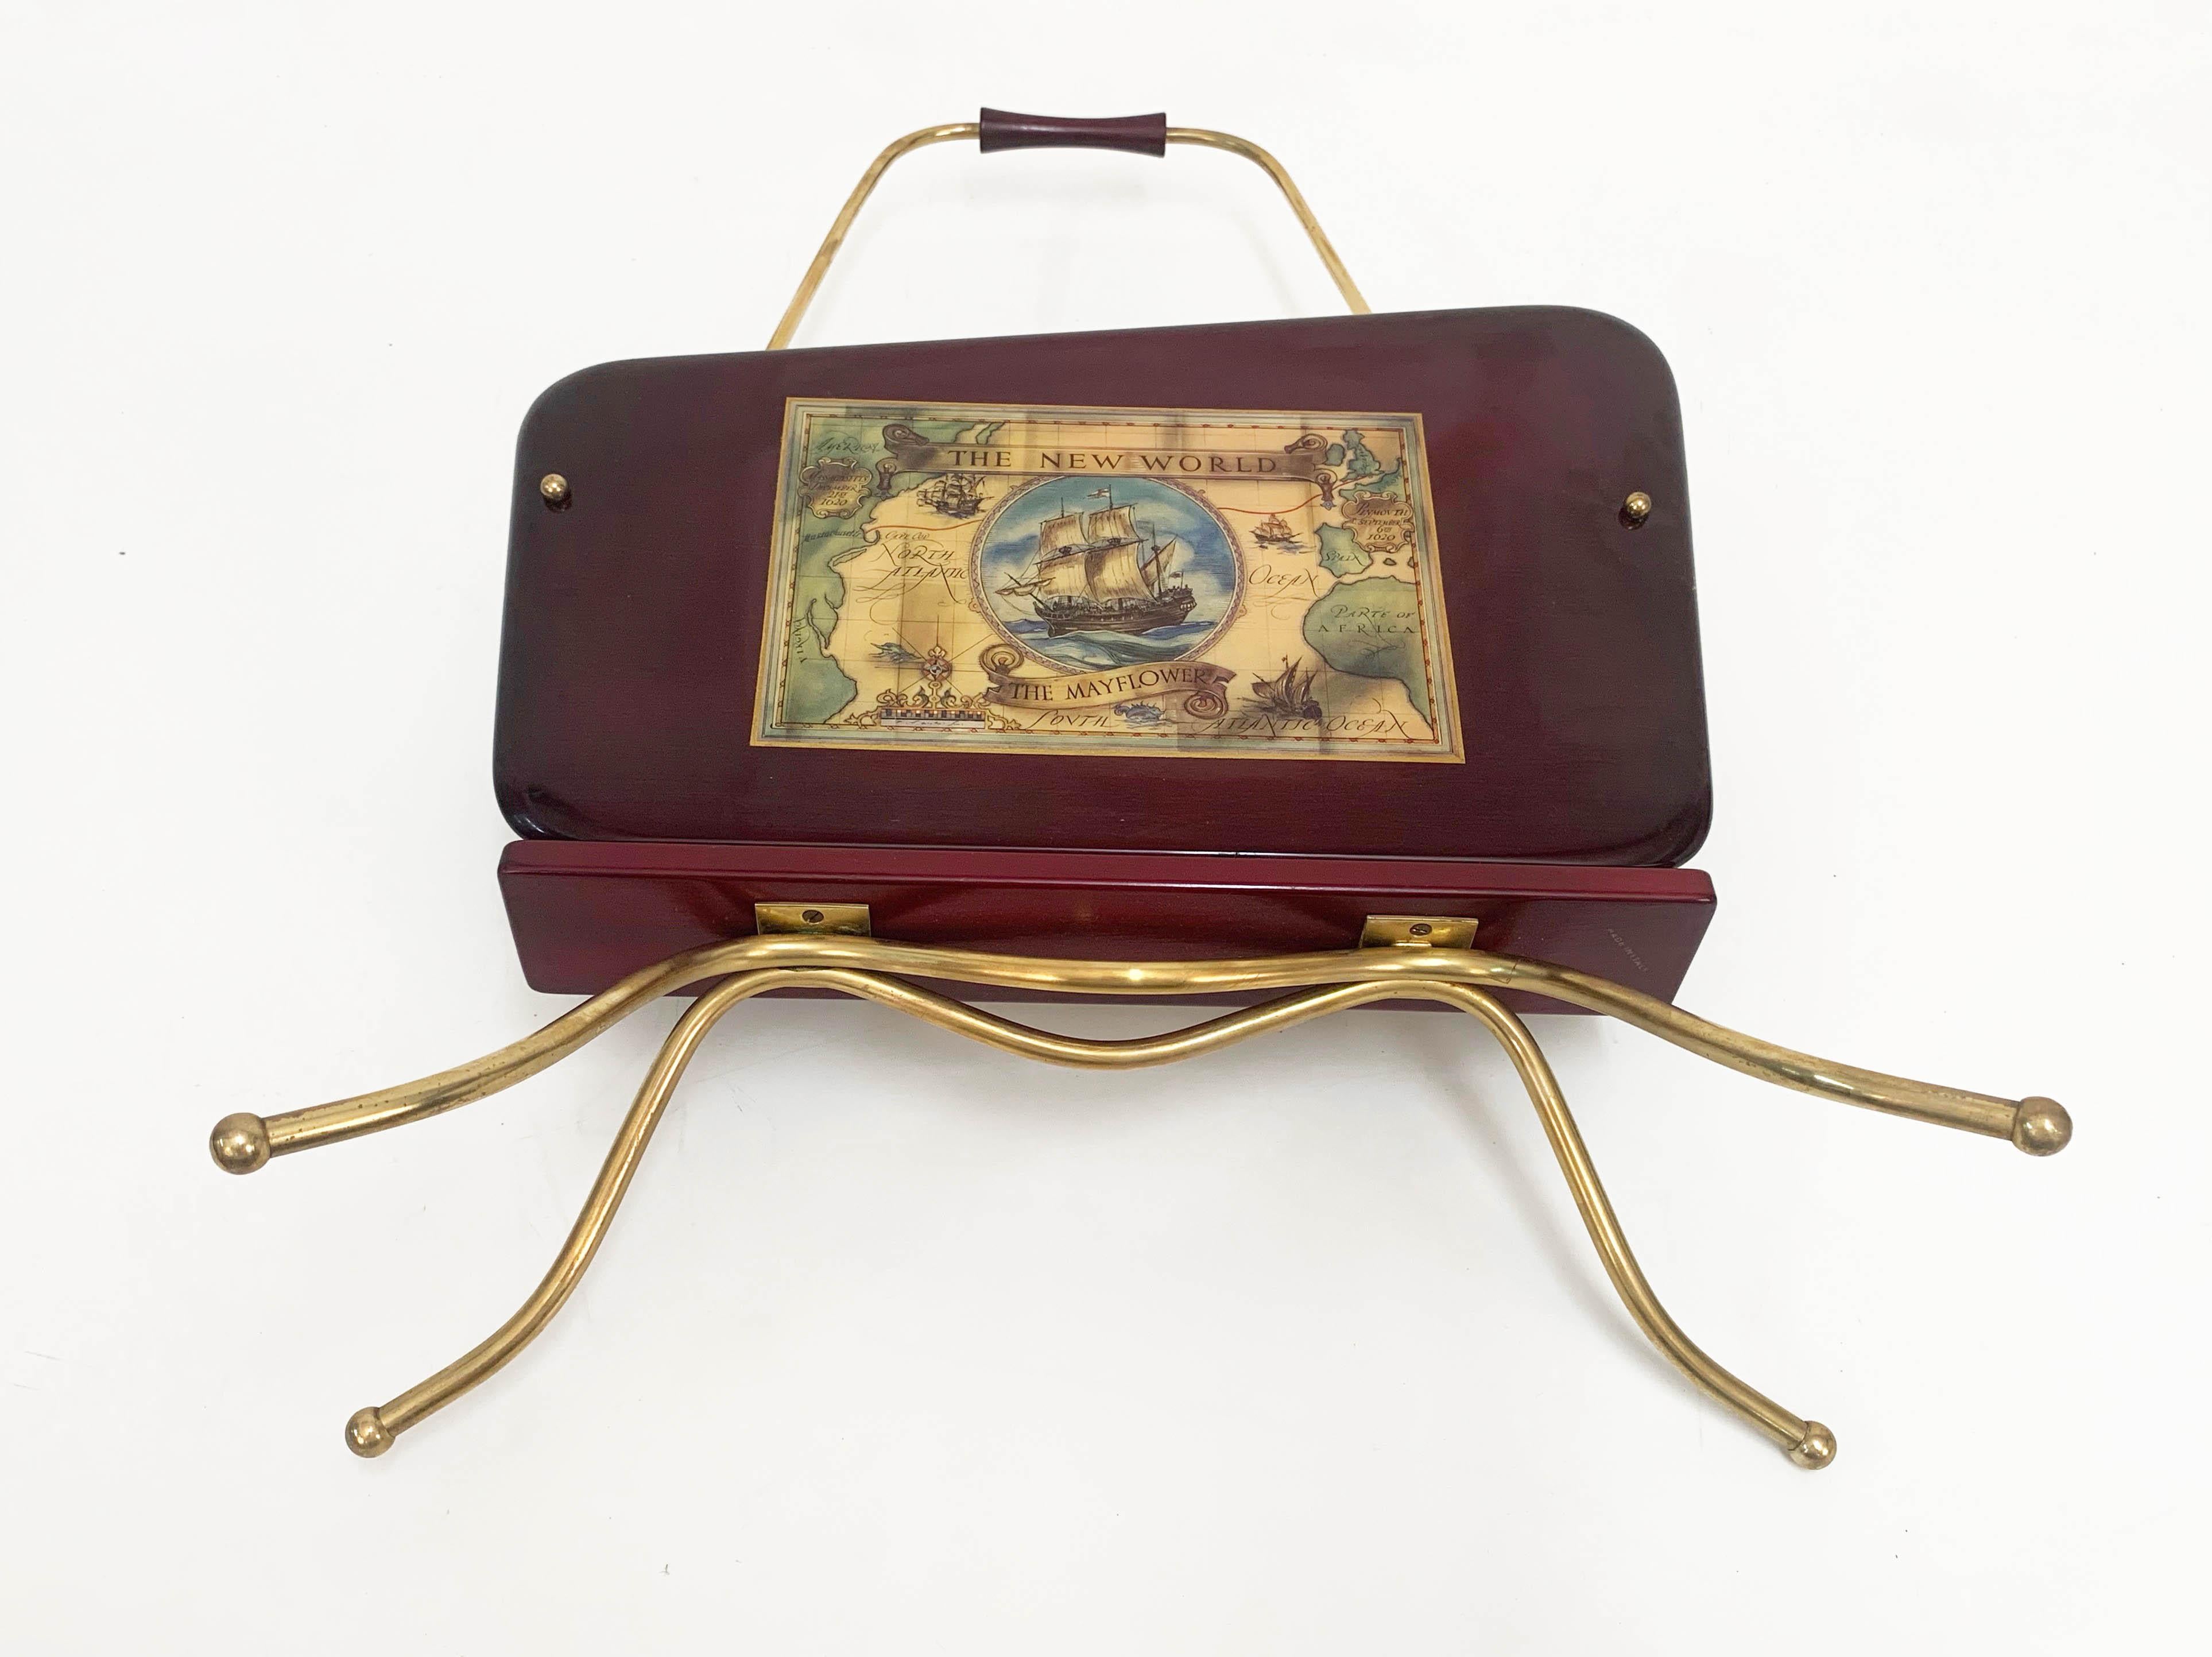 Gio Ponti Midcentury Wood and Brass Italian Magazine Rack with Handle, 1950s For Sale 10